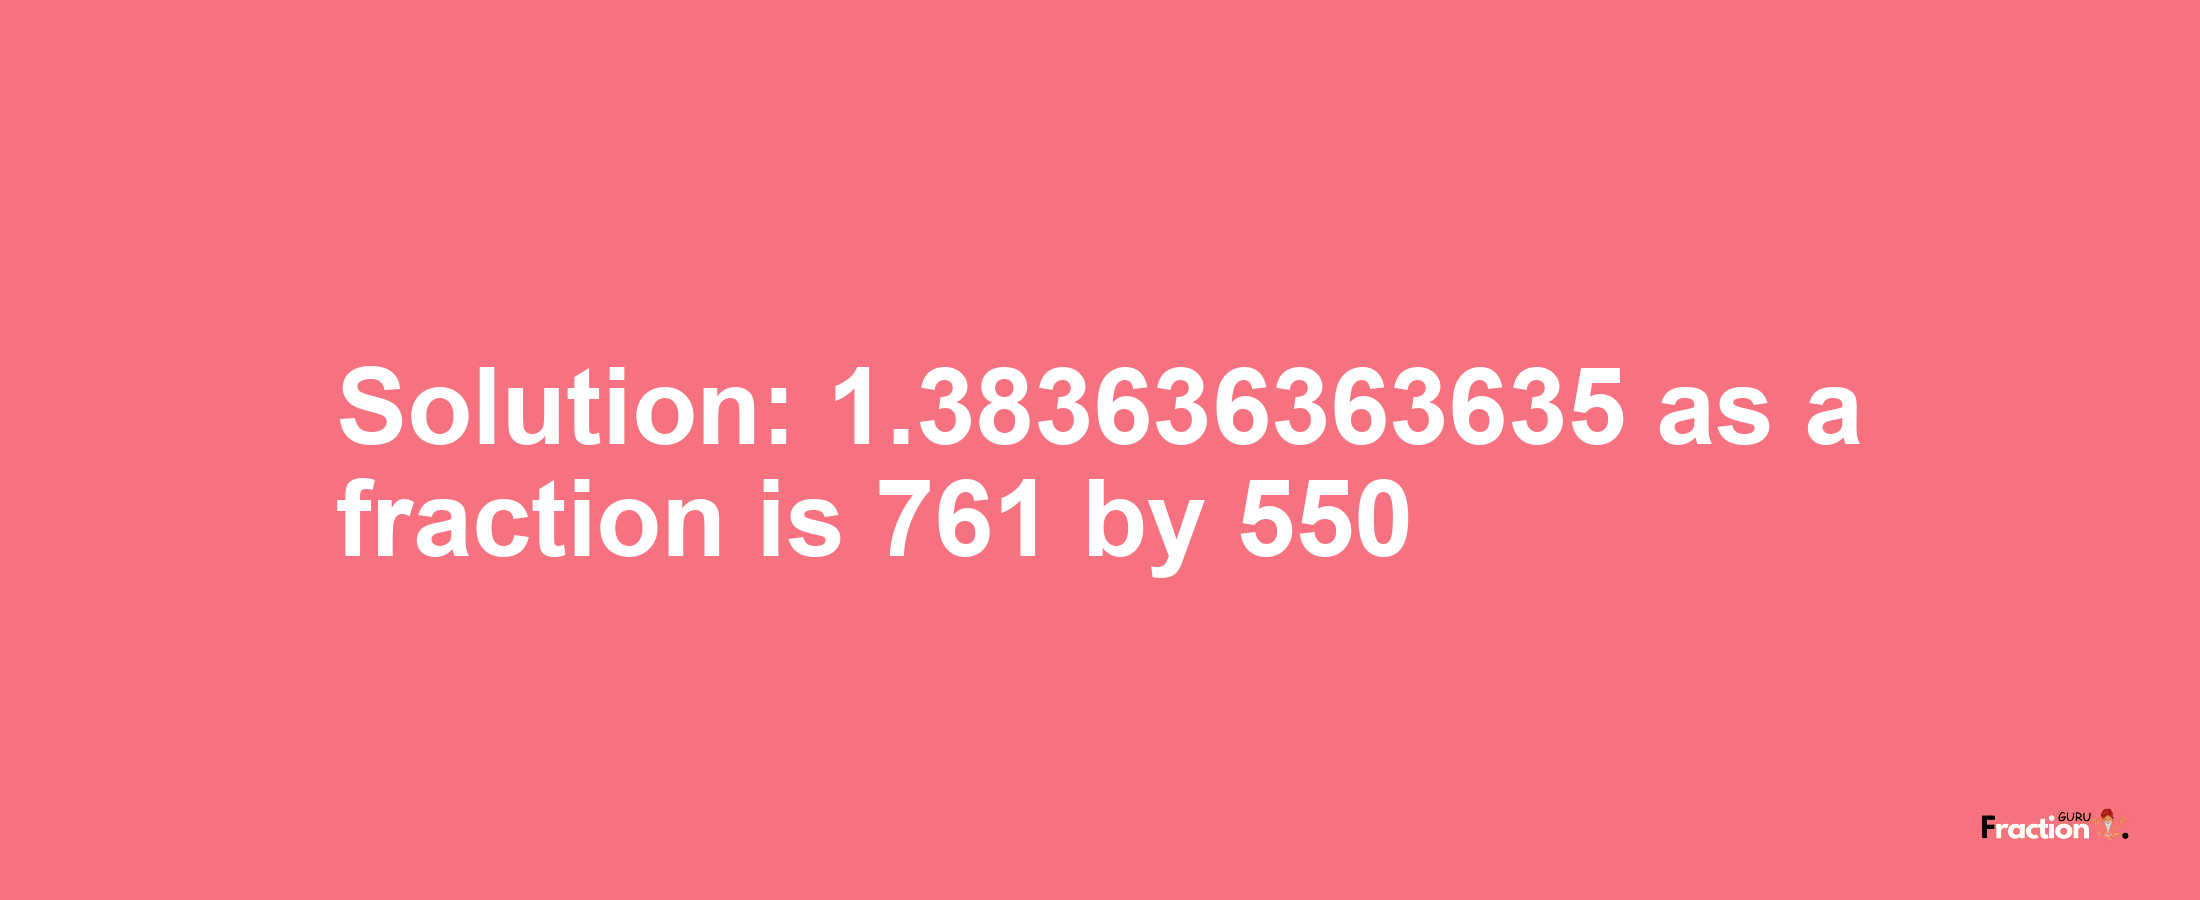 Solution:1.383636363635 as a fraction is 761/550